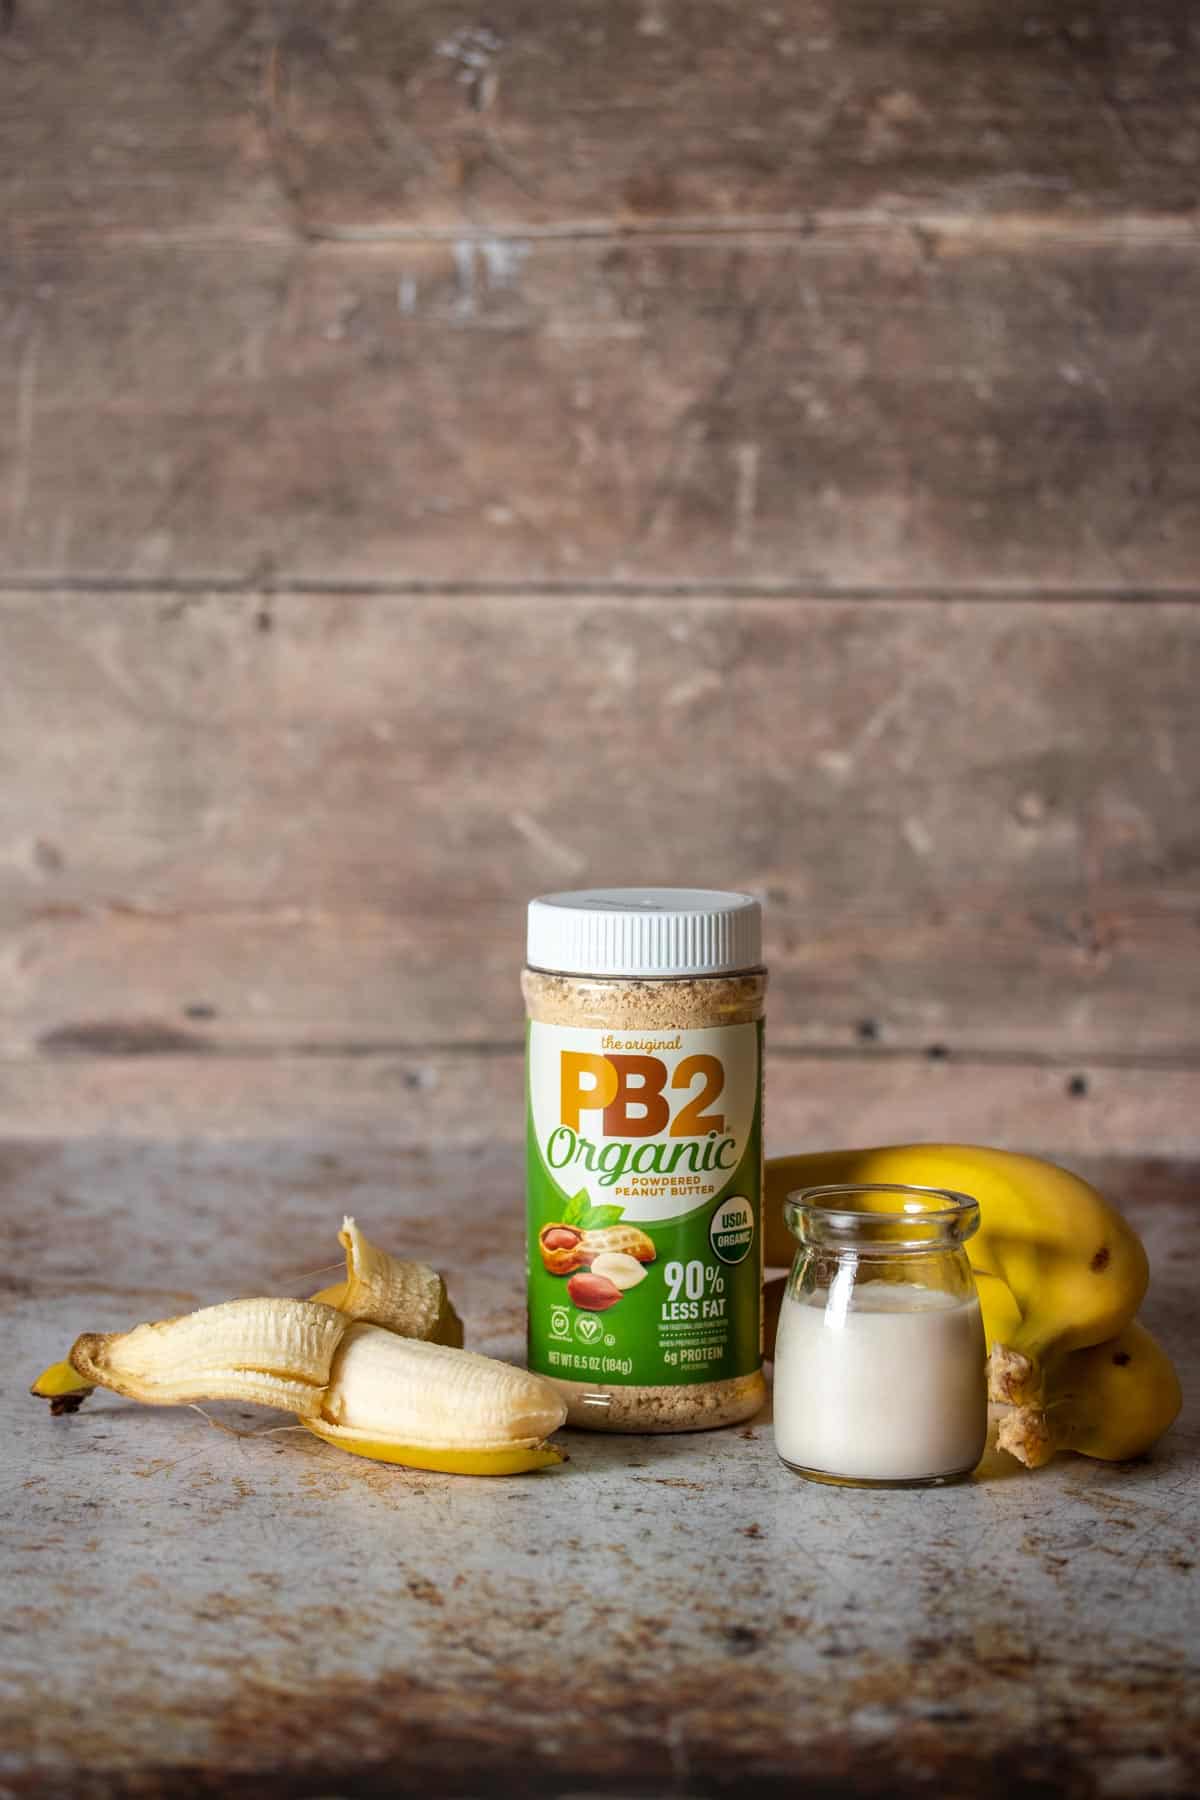 An open banana, closed bananas, jar of milk and container of powdered peanut butter with a green and white label.